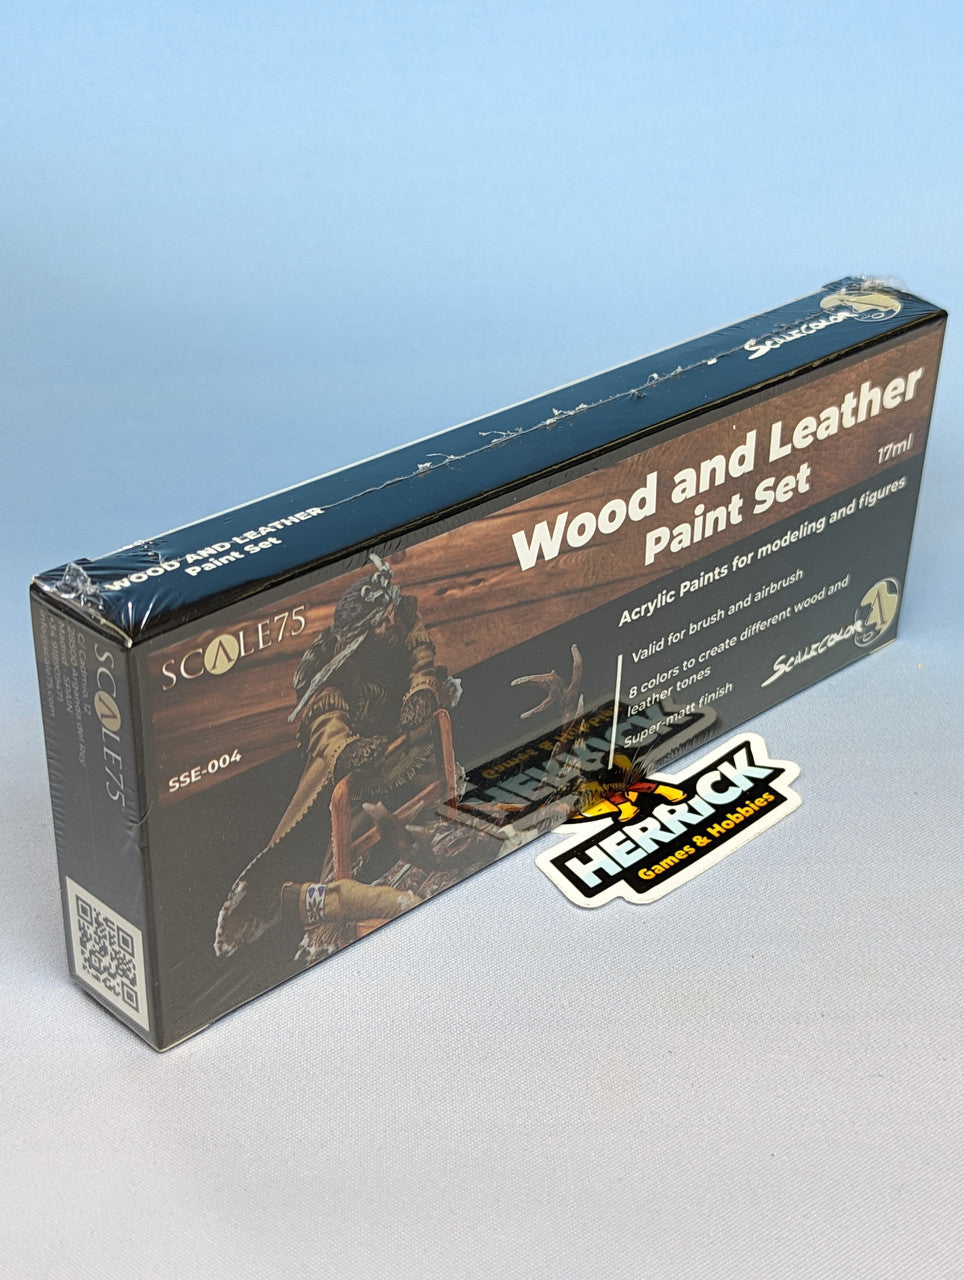 Scale75: Wood And Leather Paint Set